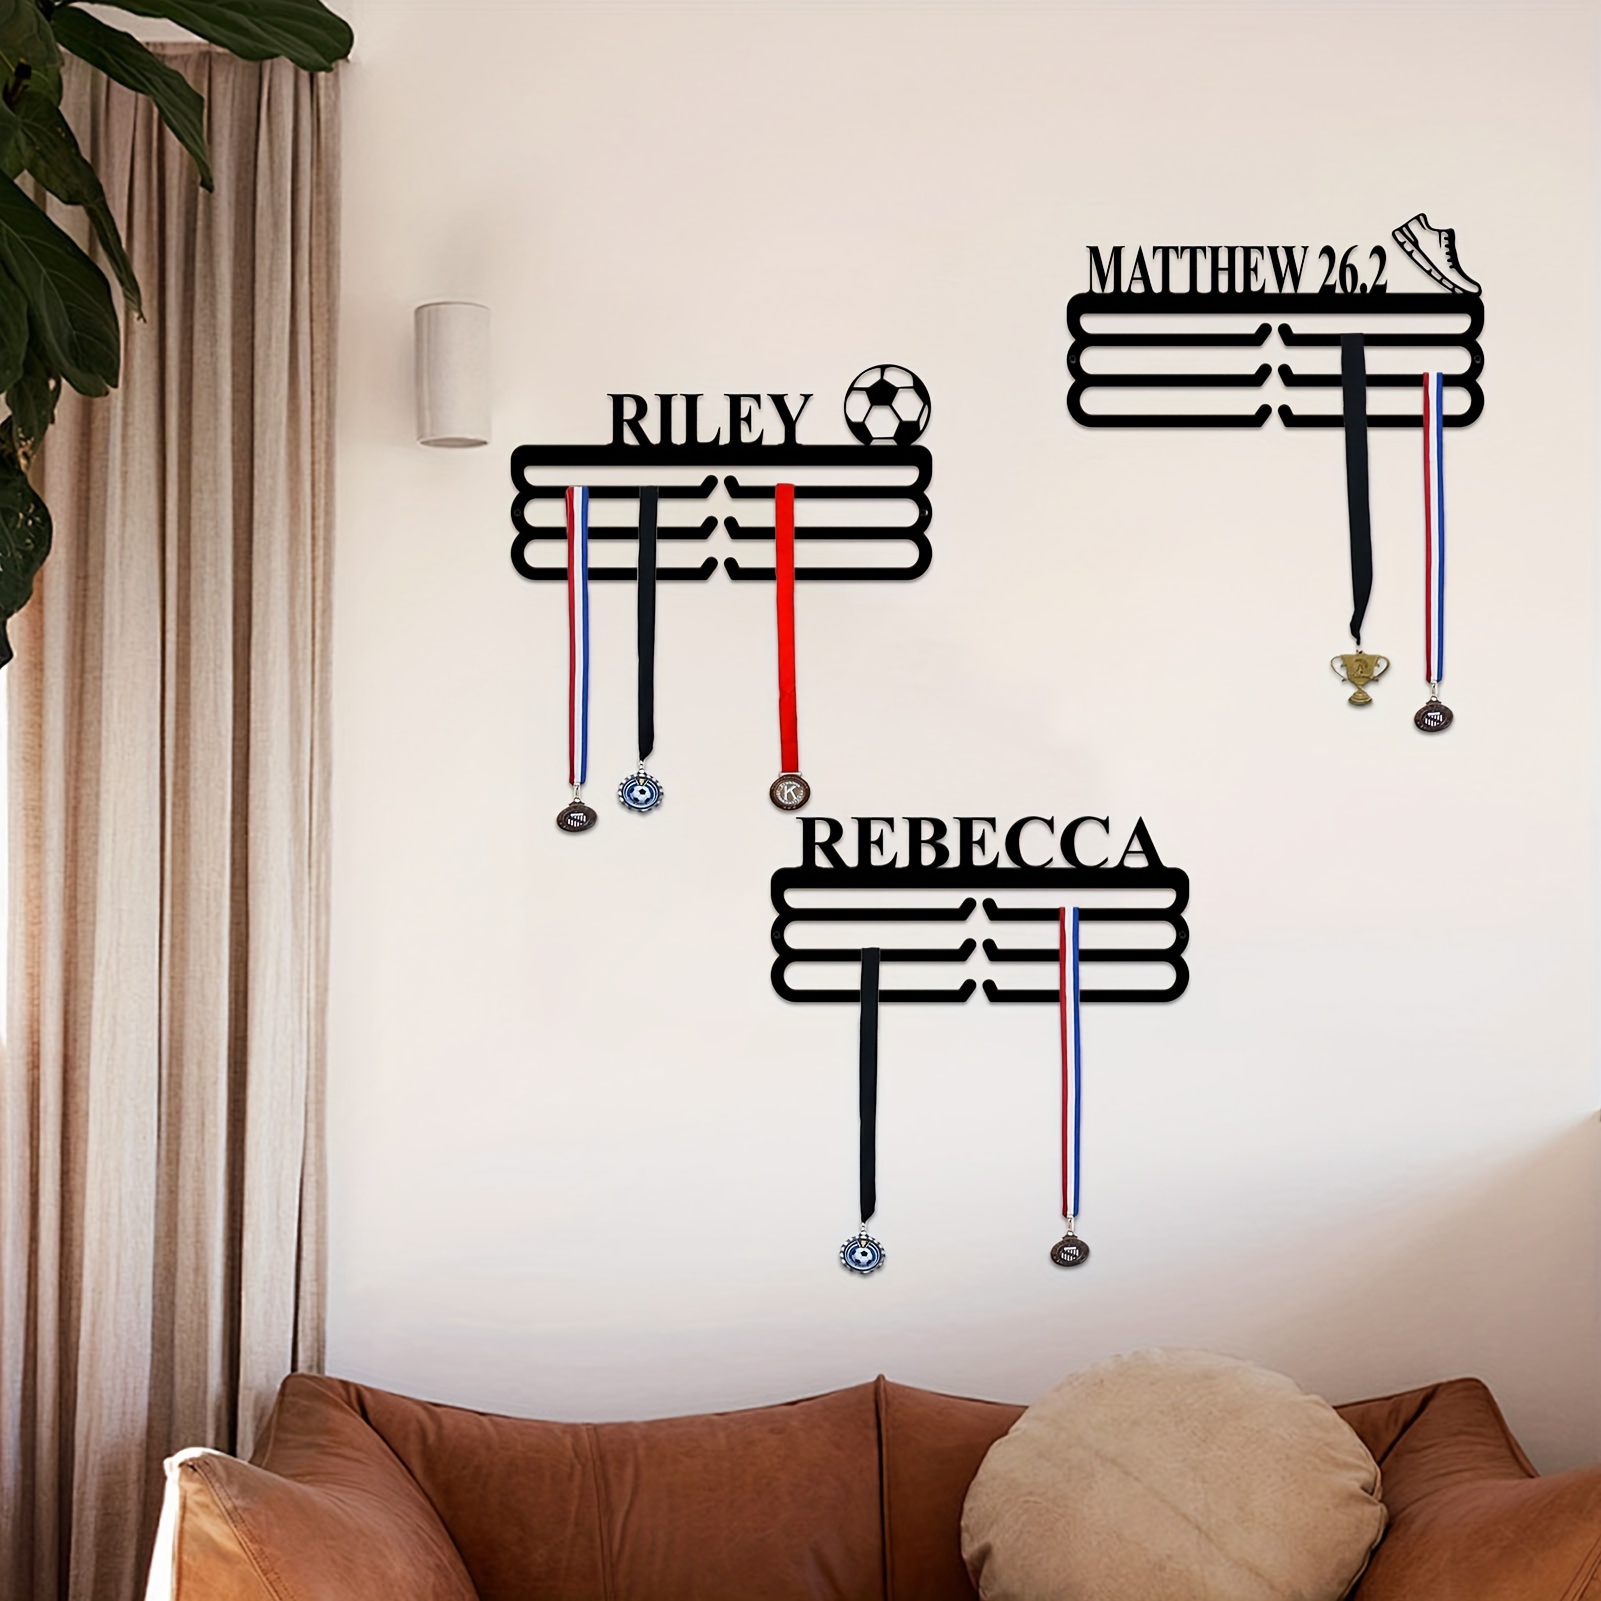 

1pc, Customized Metal Medal Hangers For Soccer And Running, Personalized Name Award Rack, Sports Medal Display, Wall Decor, Home Art, Classic Style